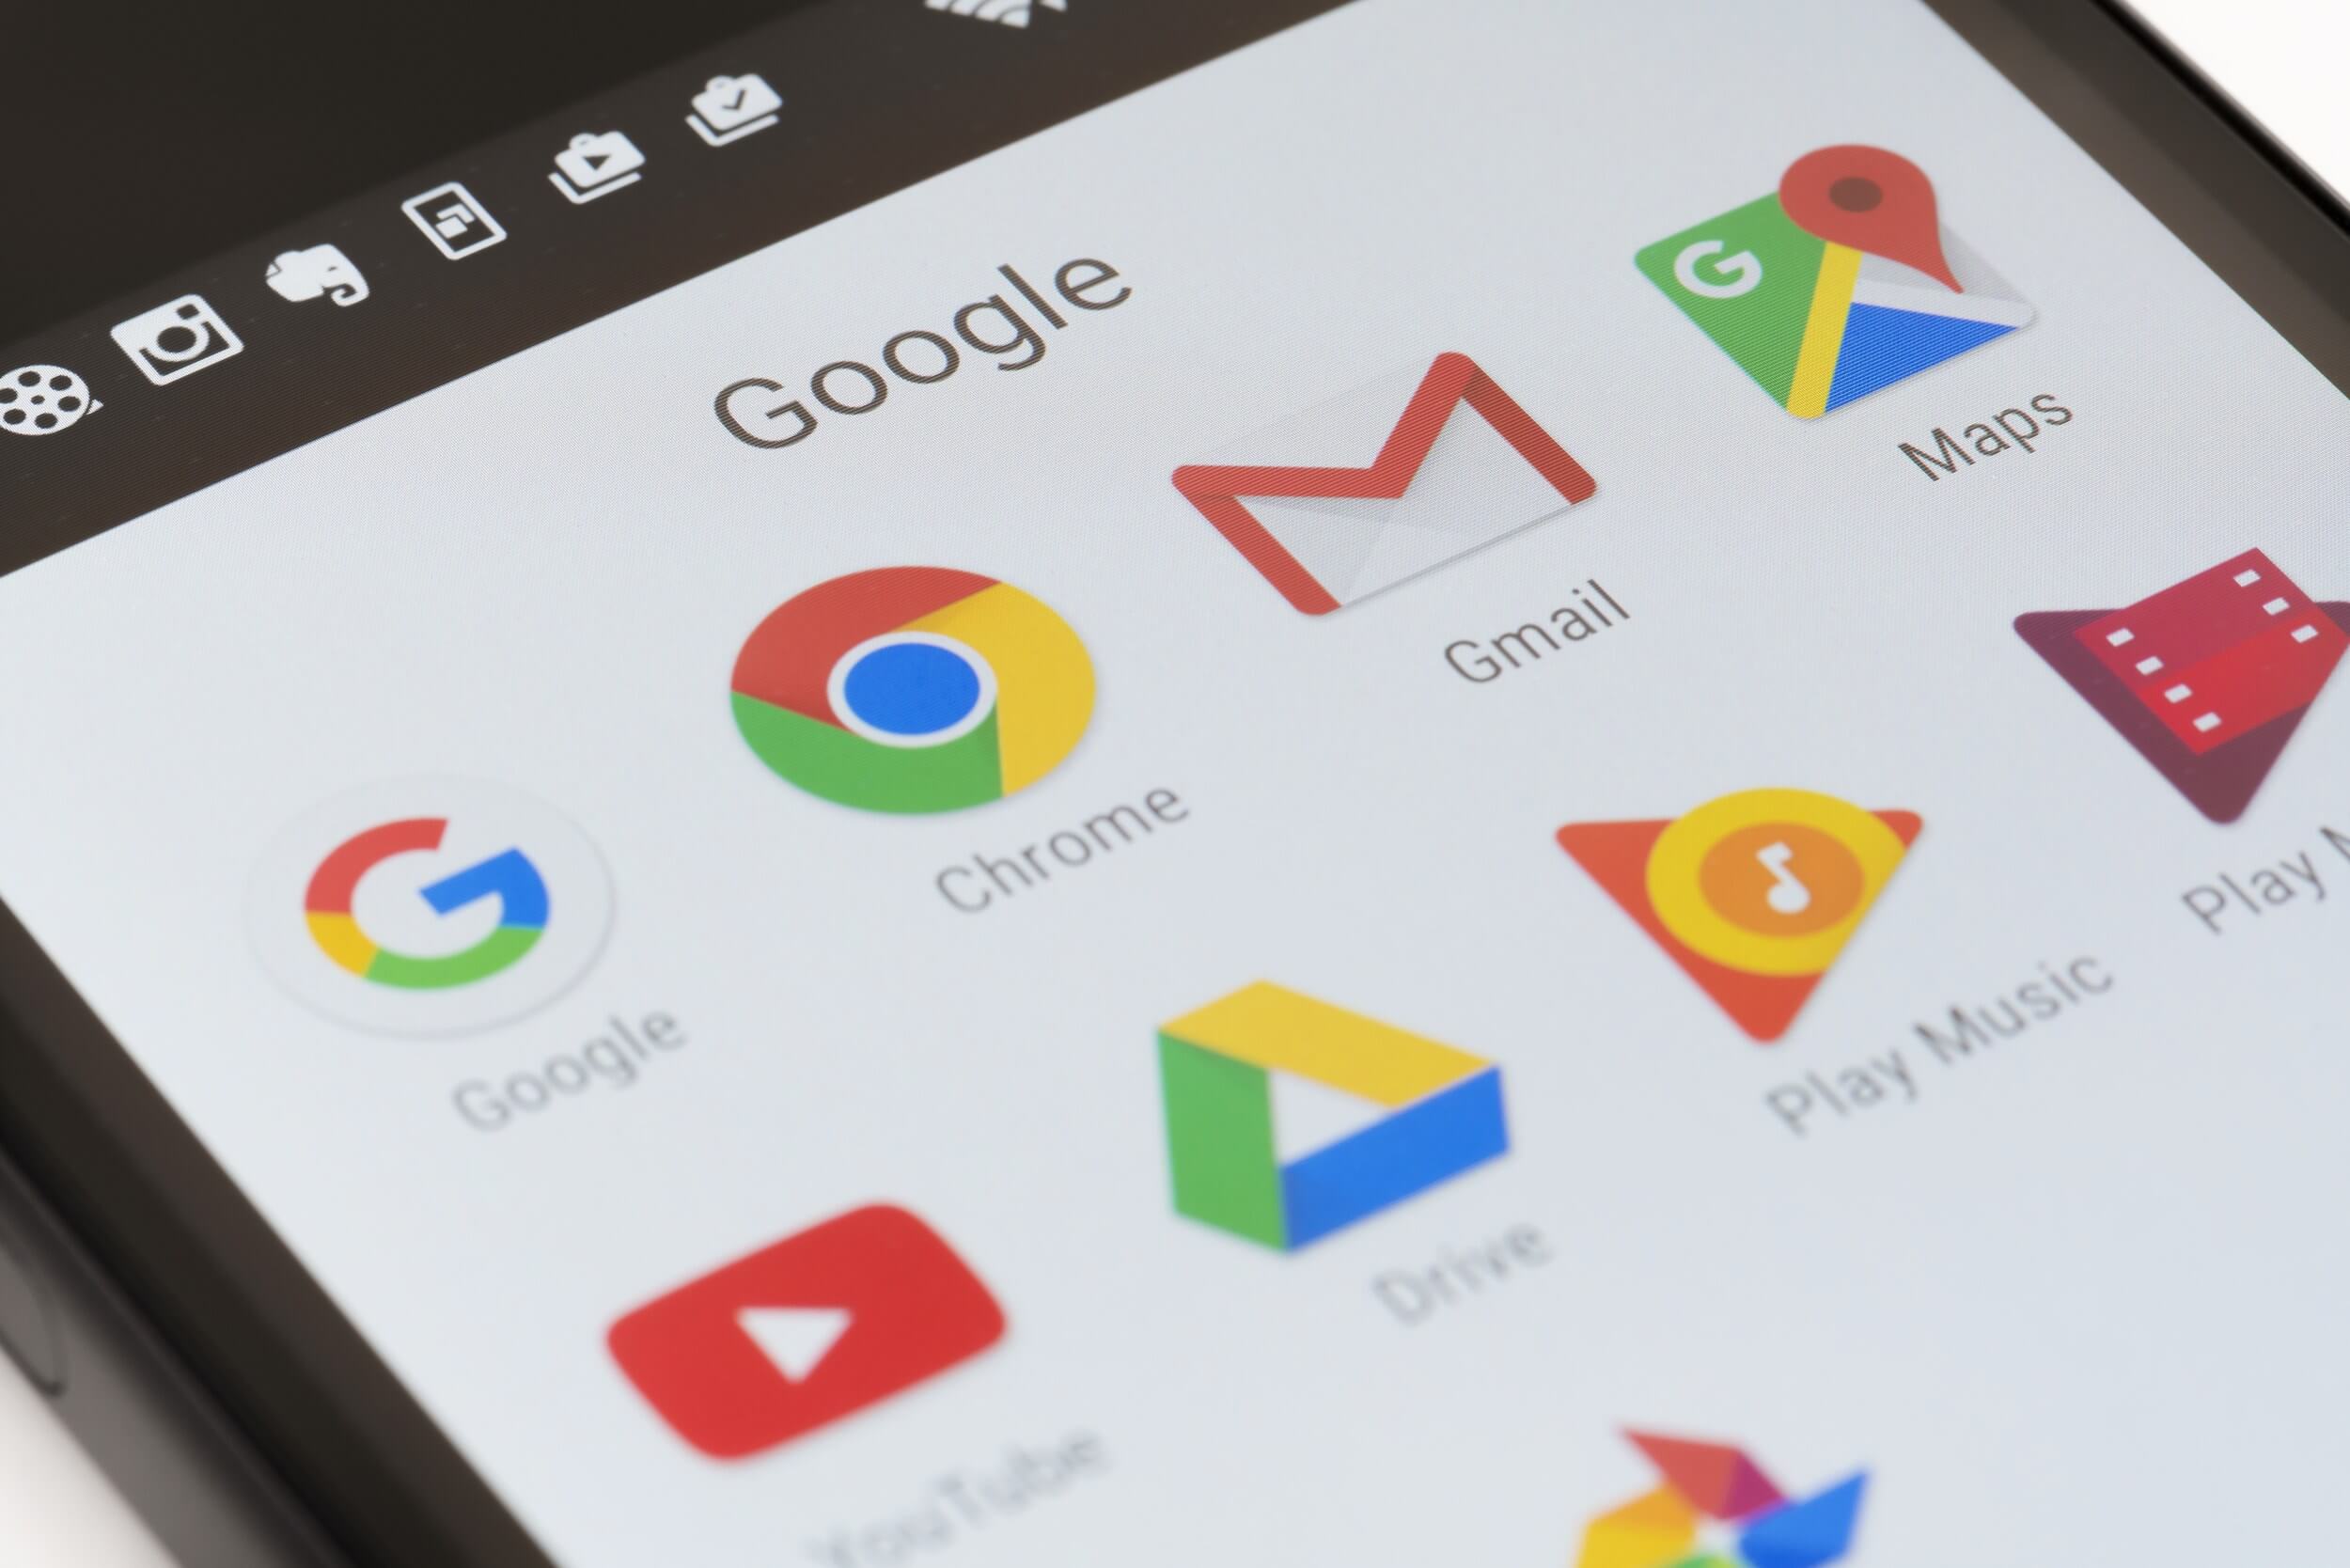 Gmail app for Android and iOS getting a Material Theme refresh